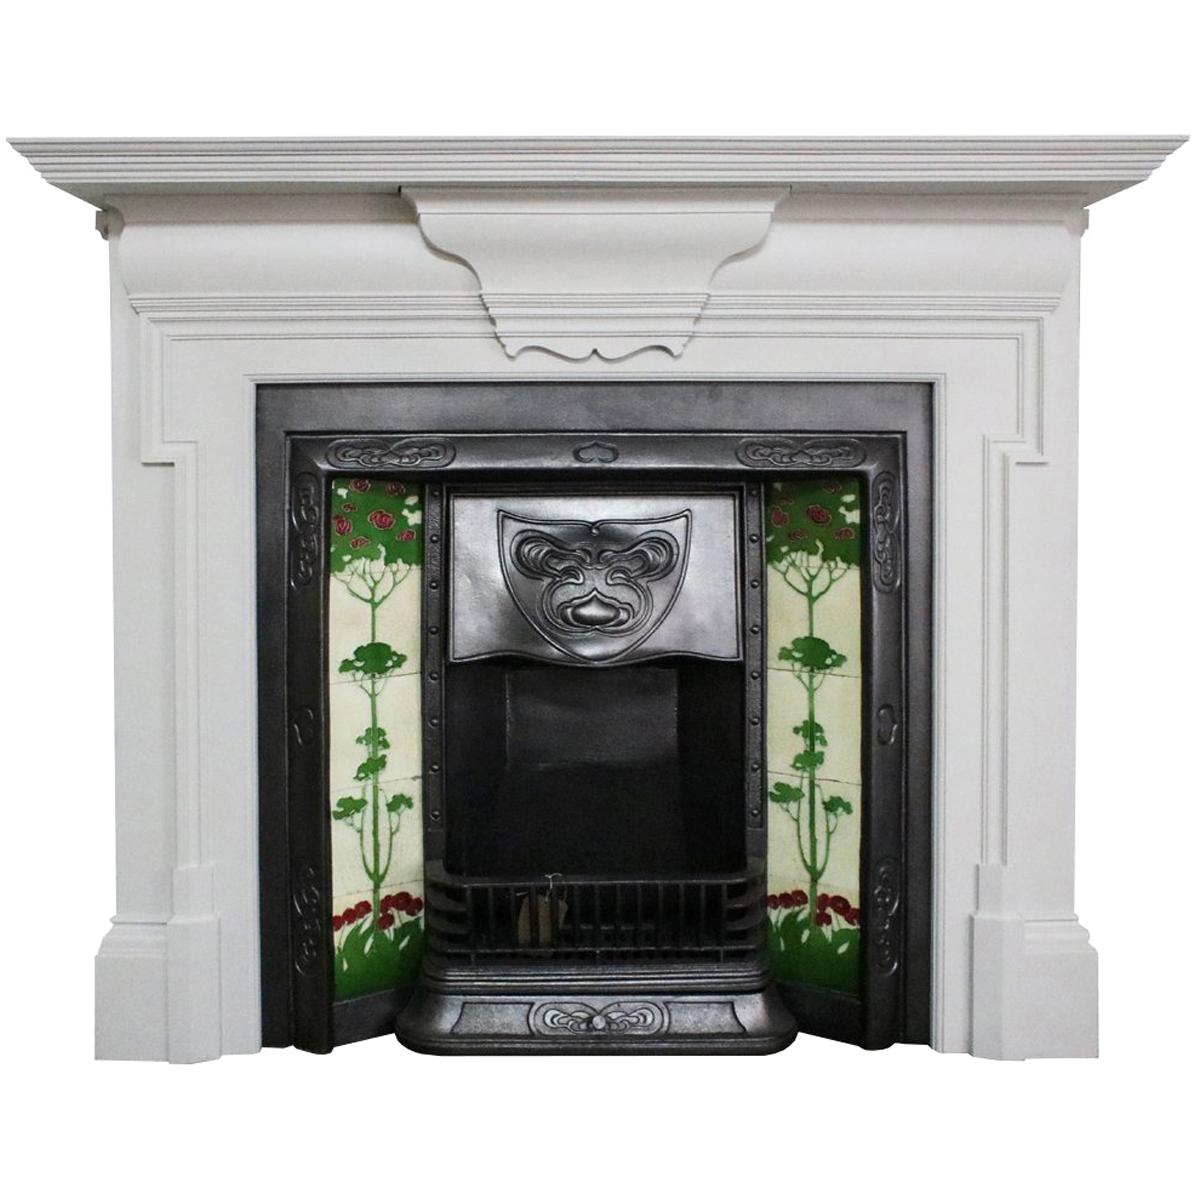 Antique Painted Edwardian Cast Iron Fire Surround in the Georgian Manner